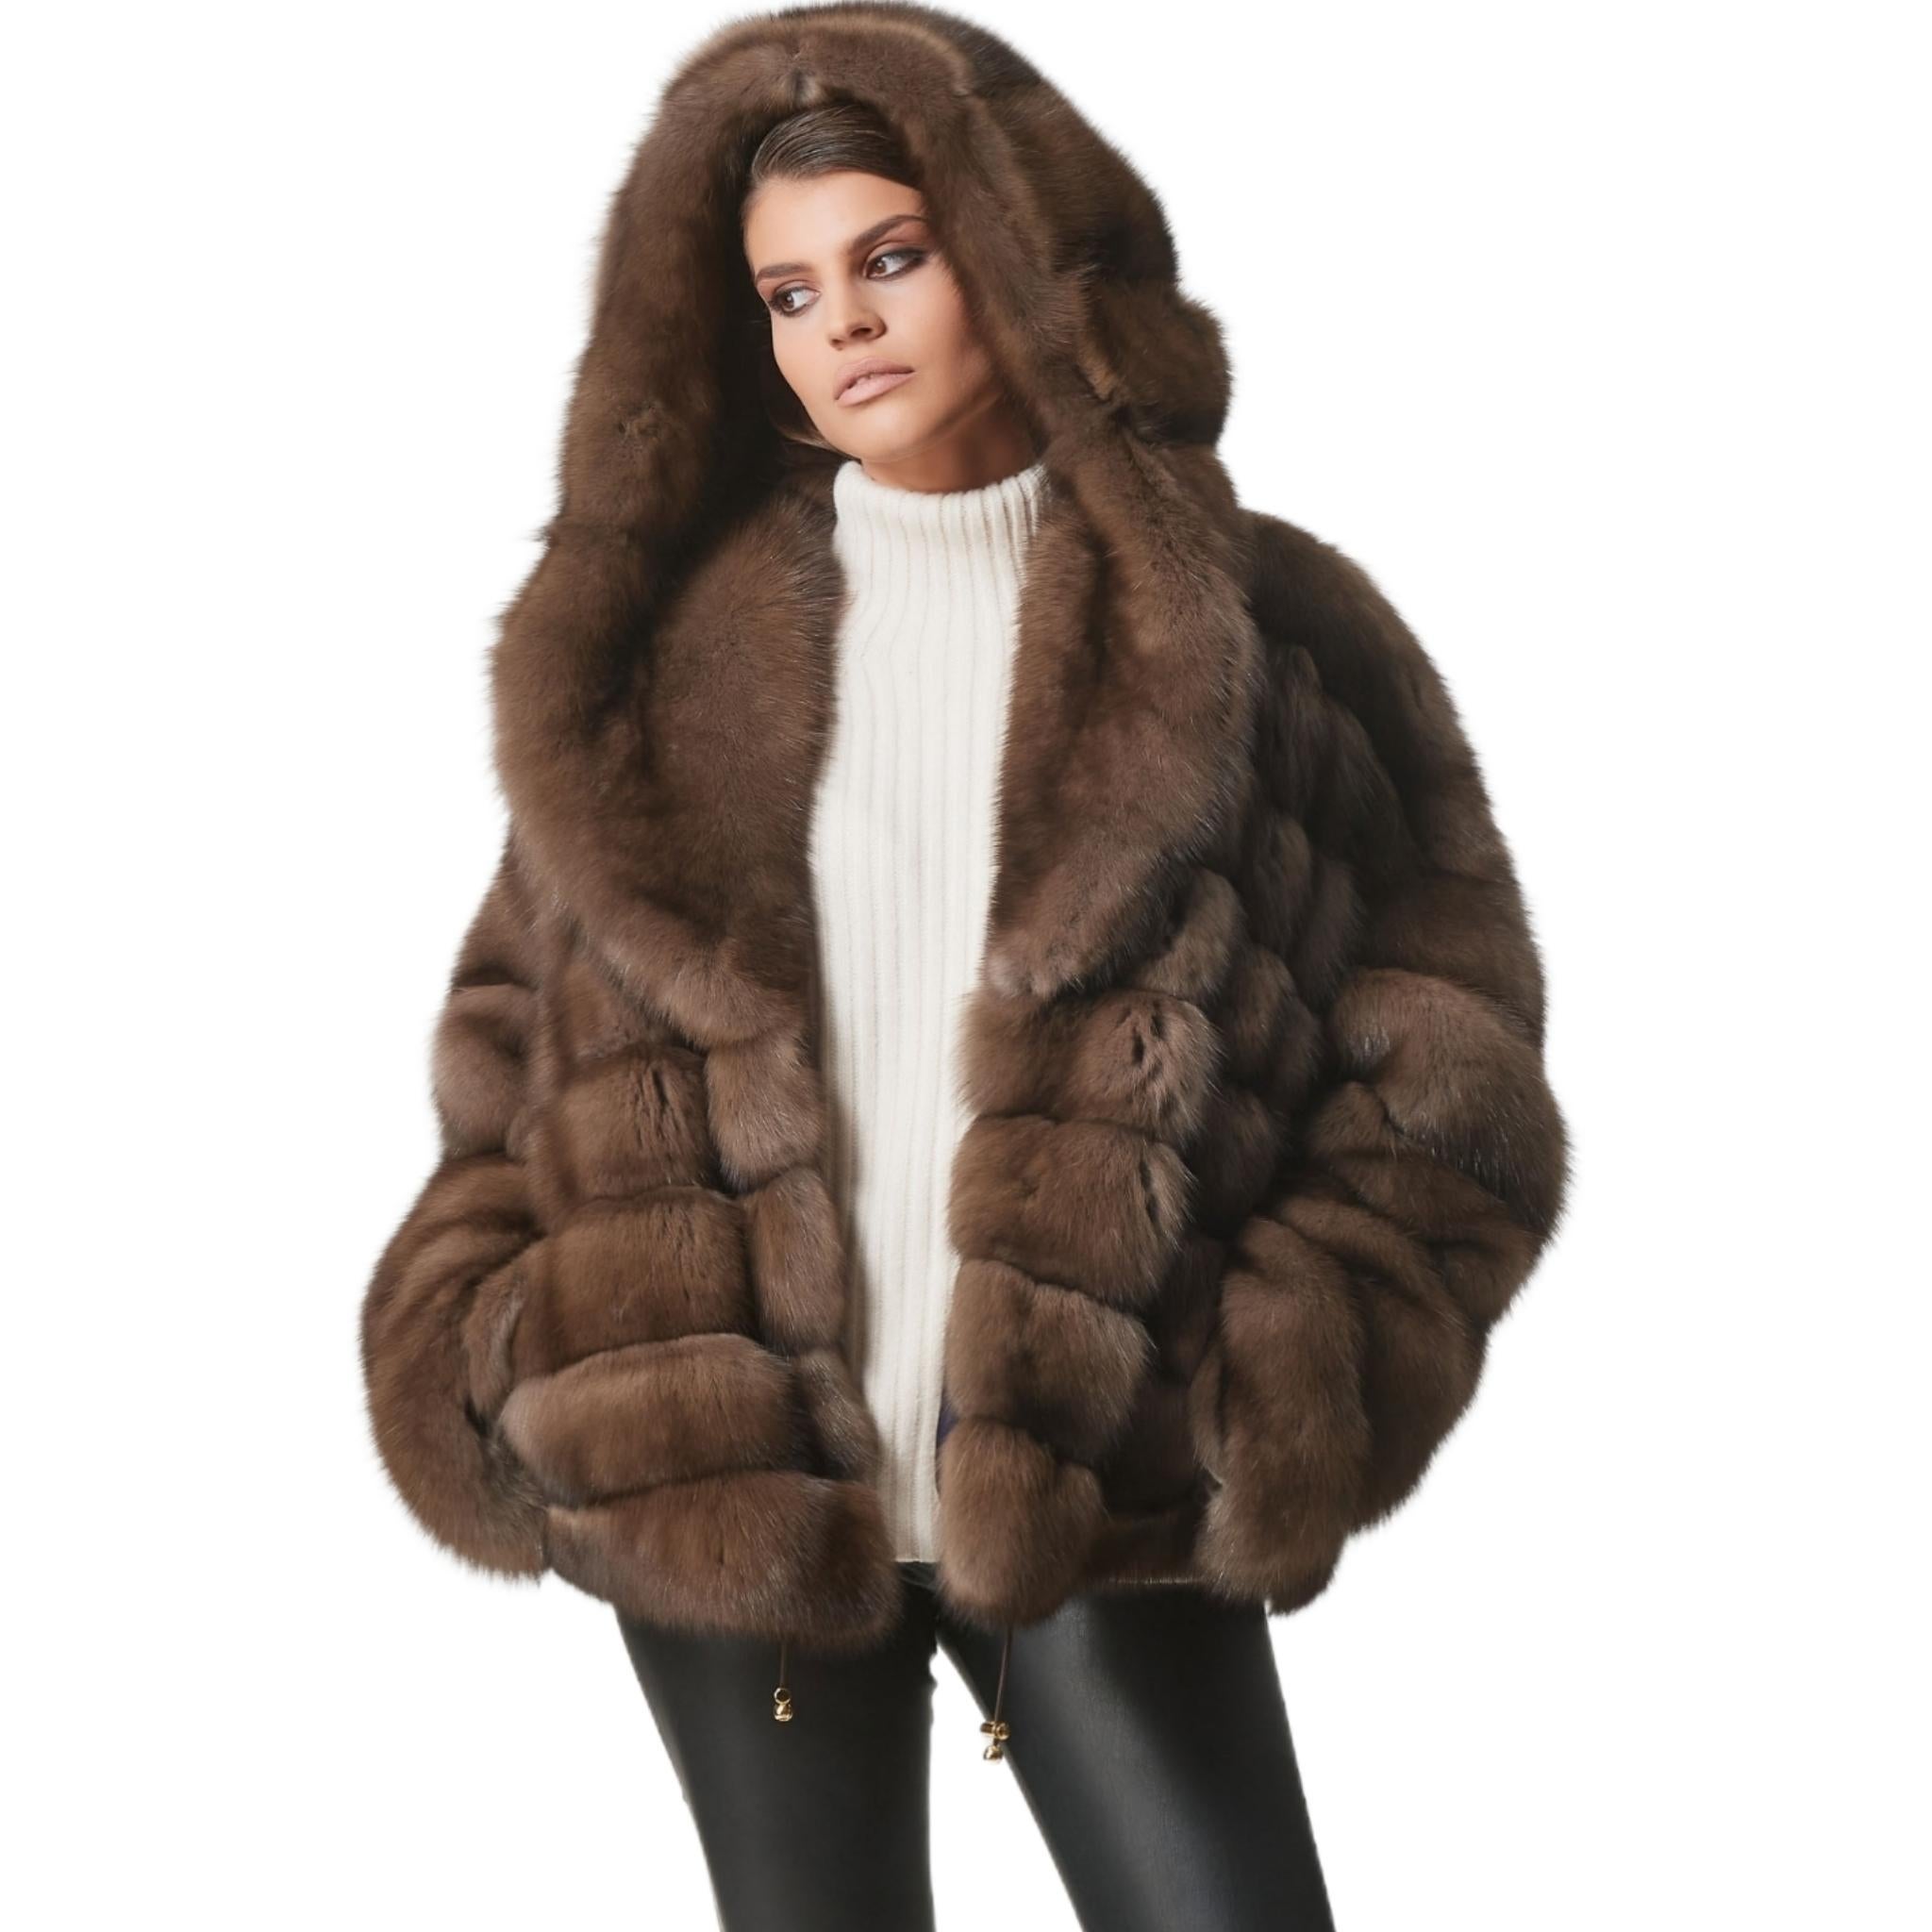 PRODUCT DESCRIPTION:

Sobol Russian Sable Jacket size Oversized XL 18-20
Condition: Brand New

Closure: German hook

Color: chocolate

Material: Sobol certified Russian Sable

Garment type: Coat

Sleeves: Long sleeves

Pockets: Two pockets

Collar: